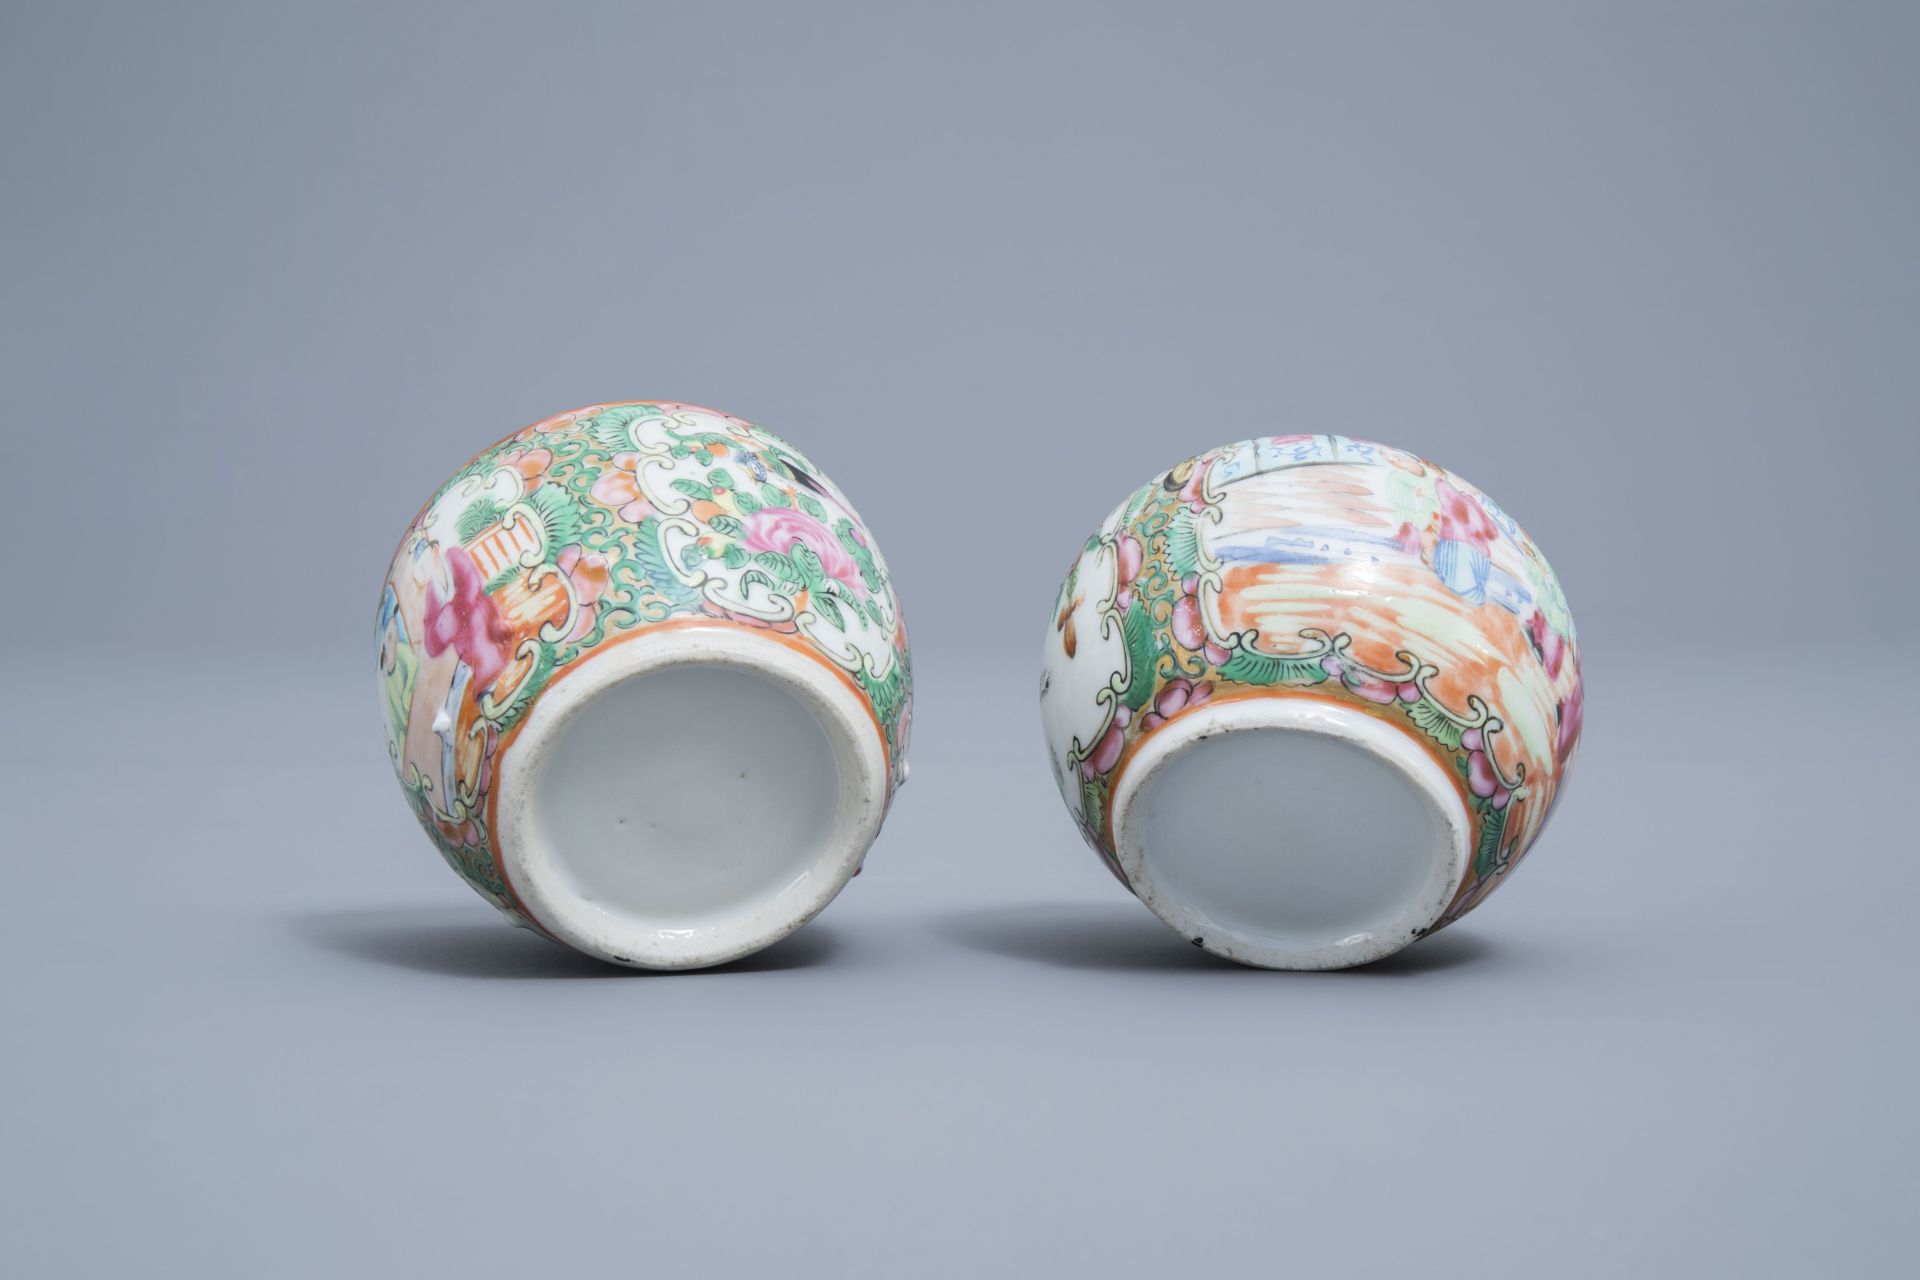 A varied collection of Chinse Canton and famille rose porcelain, 19th C. - Image 18 of 19